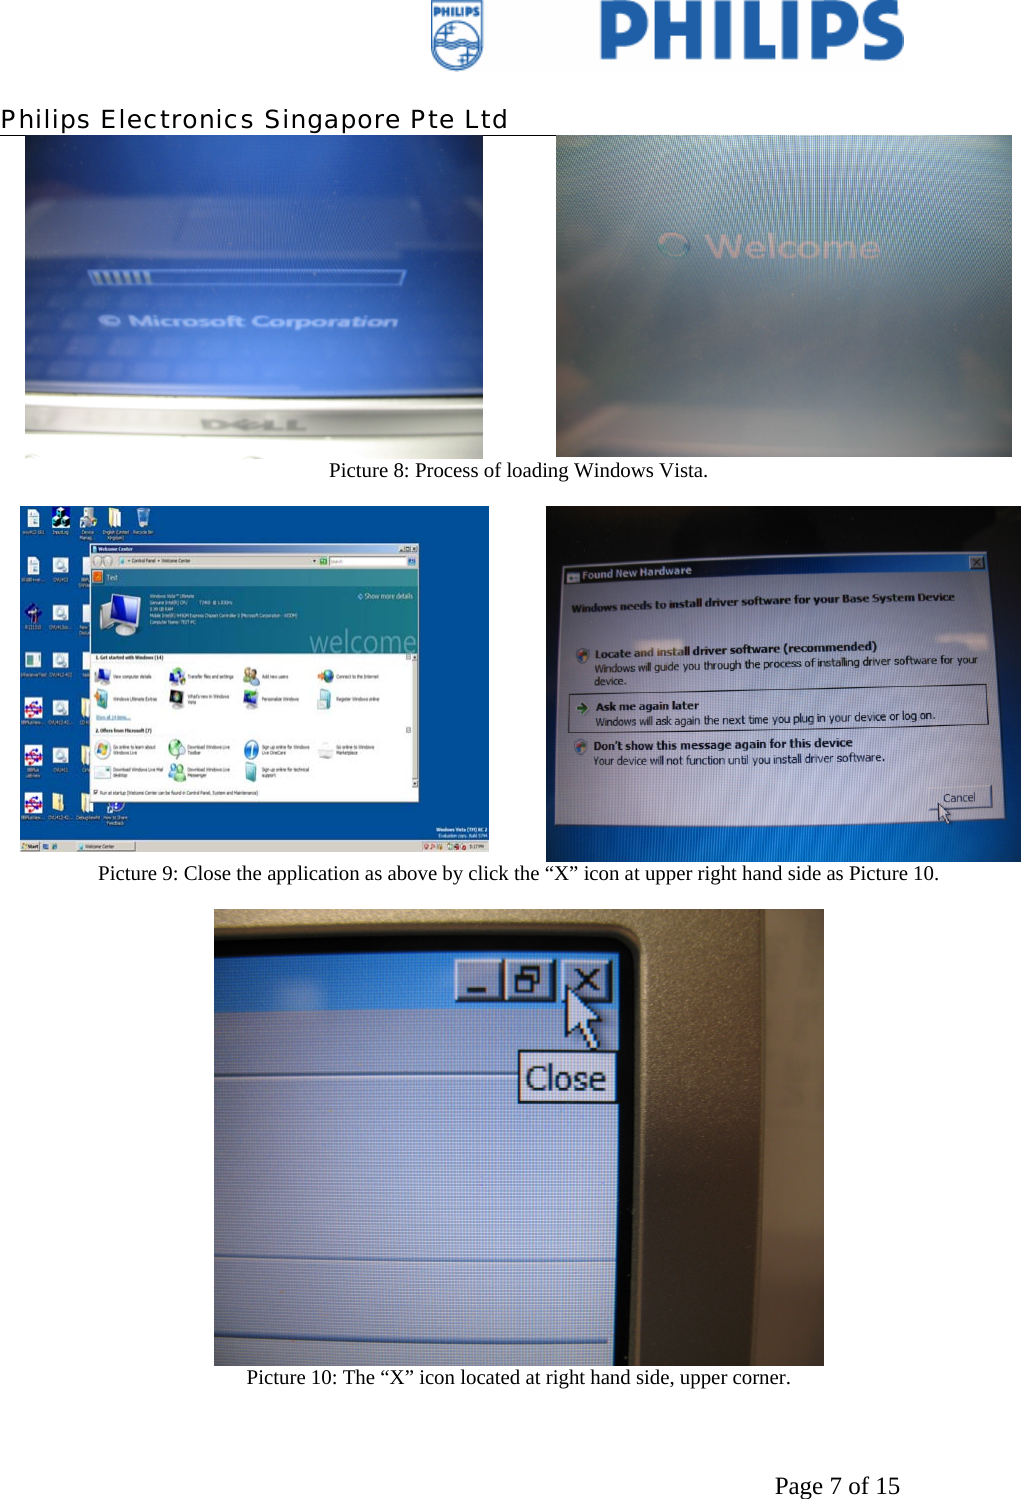    Philips Electronics Singapore Pte Ltd  Page 7 of 15  Picture 8: Process of loading Windows Vista.    Picture 9: Close the application as above by click the “X” icon at upper right hand side as Picture 10.   Picture 10: The “X” icon located at right hand side, upper corner. 